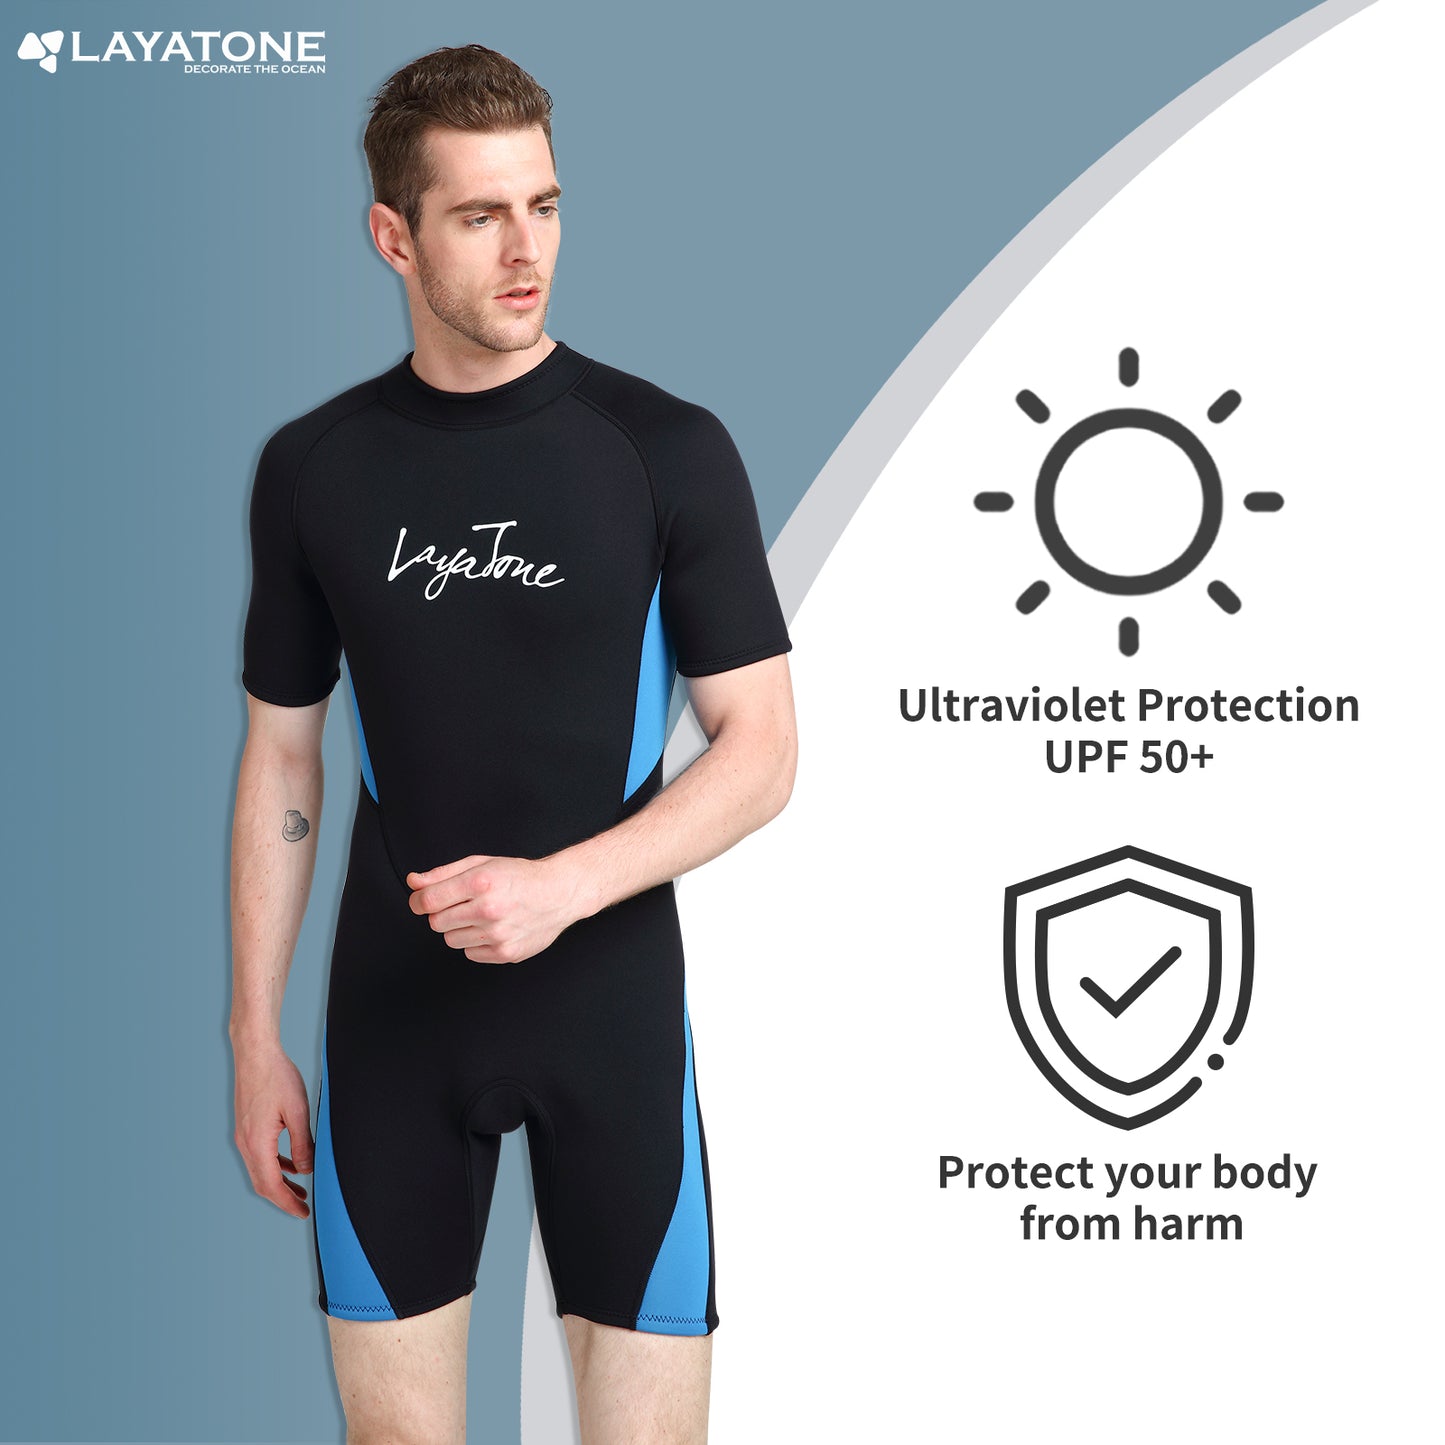 LayaTone Shorty Wetsuit Mens Womens 3mm Neoprene Shorty Wetsuits for Swimming Diving Surfing Freediving Snorkeling